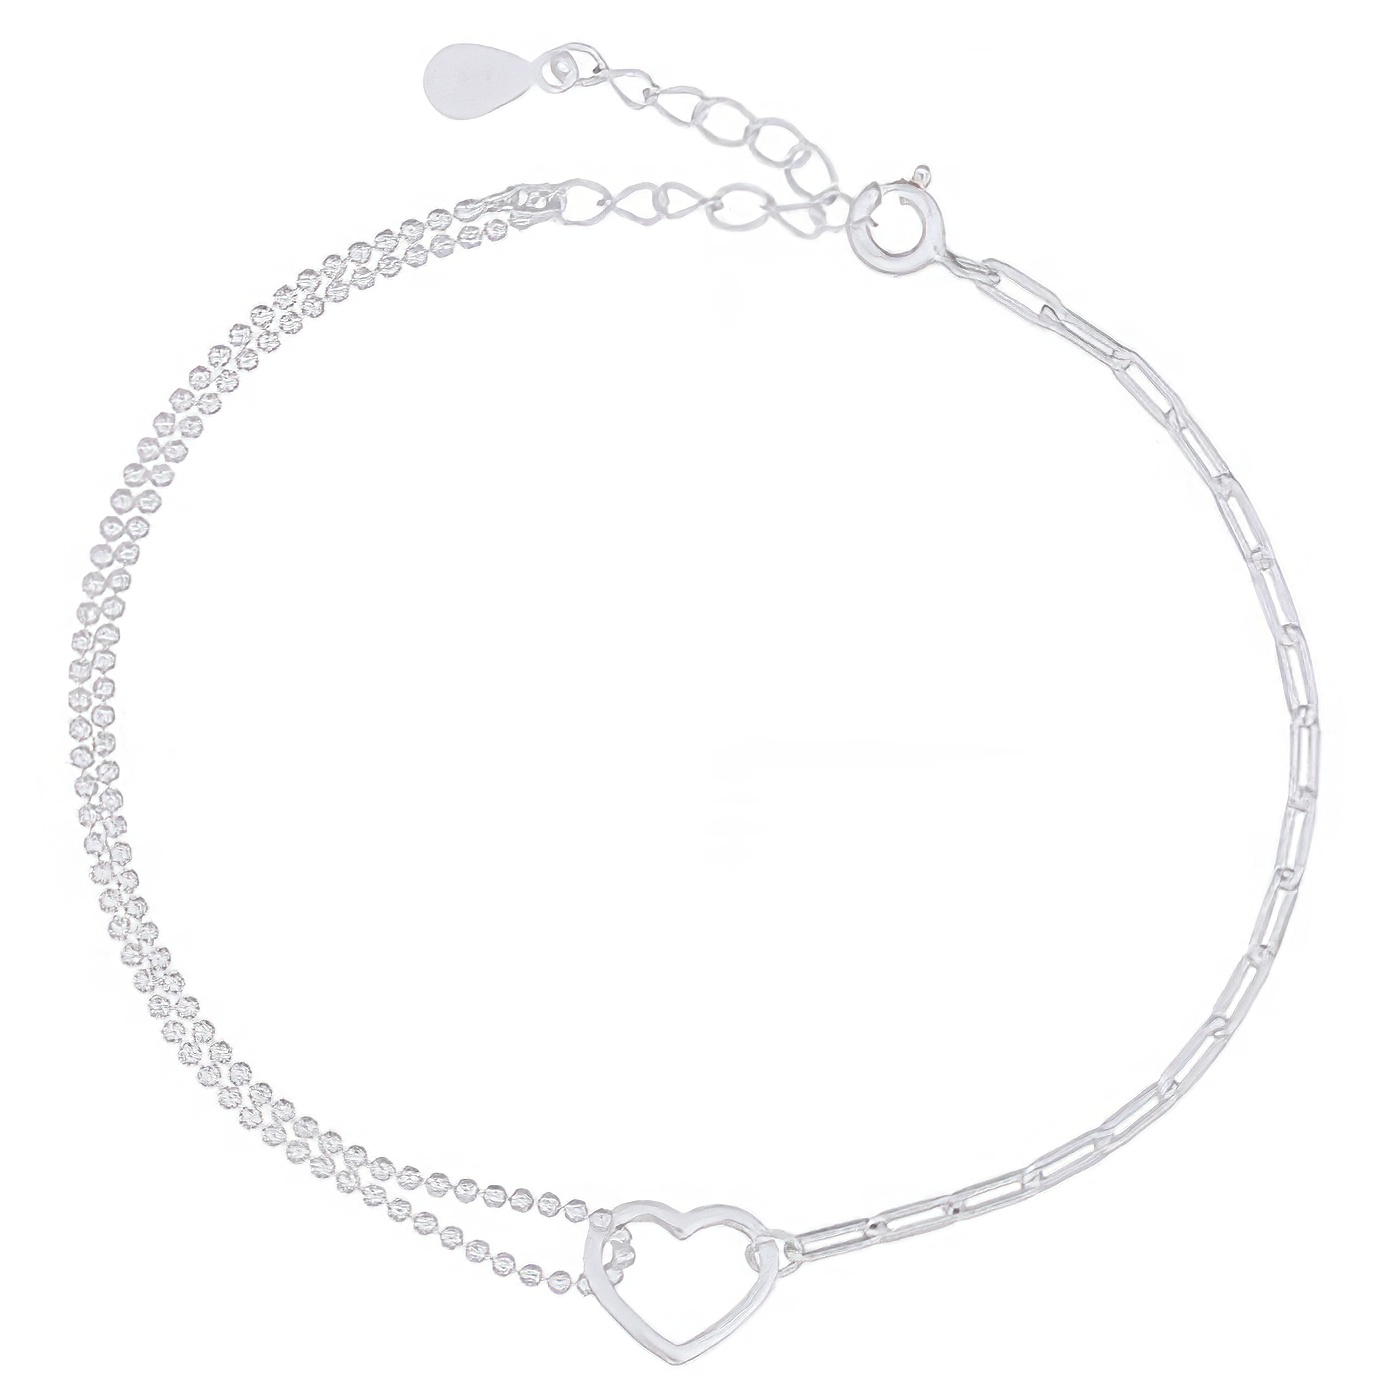 Heart Centered In Bead And Paperclip Chain Bracelet 925 Silver by BeYindi 